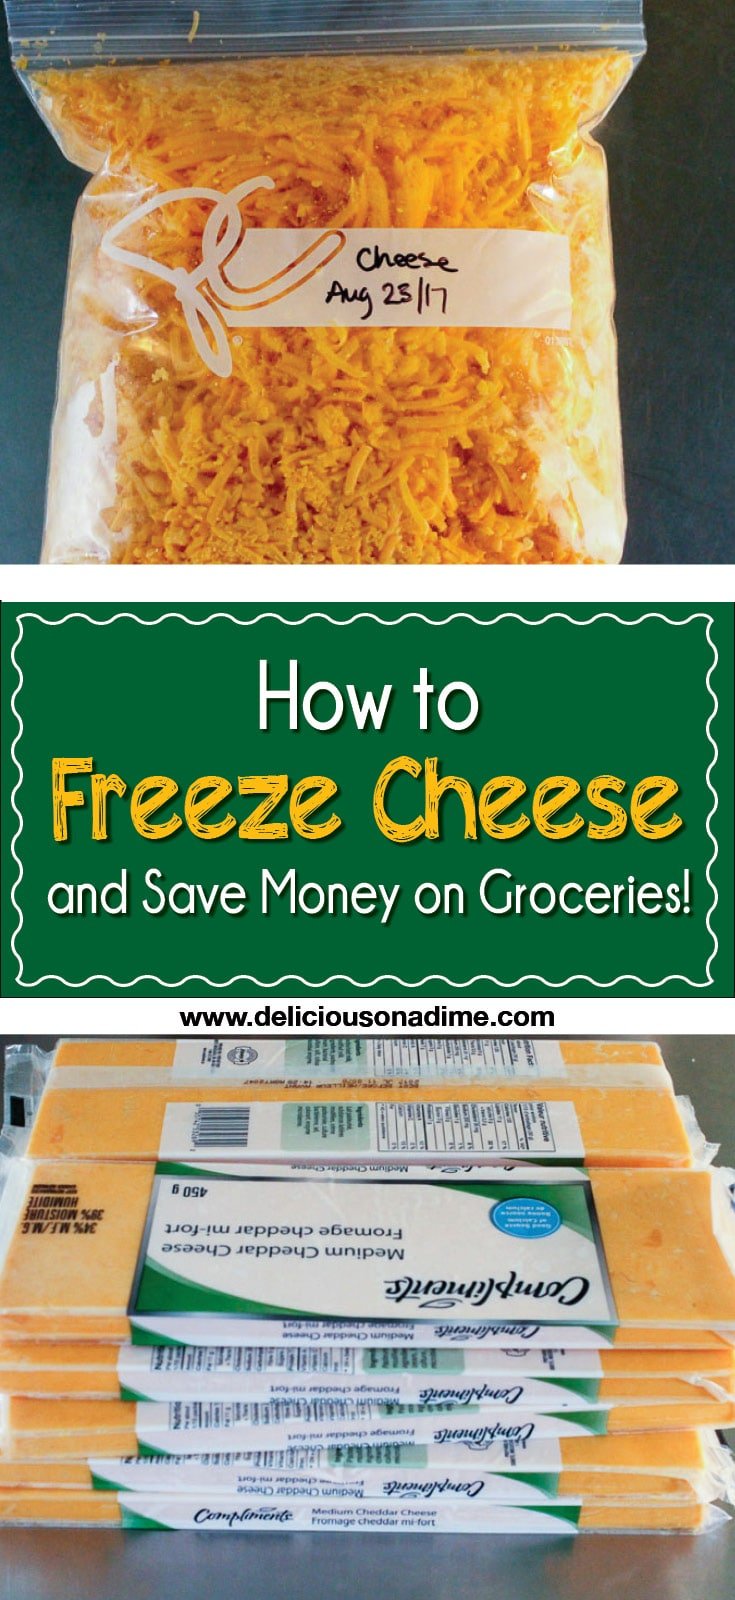 This quick and easy tip is for any of you who ever wondered, "Hmmmm... can you freeze cheese?" Yes, you can freeze cheese, and it's awesome. How to freeze cheese and save money on groceries.